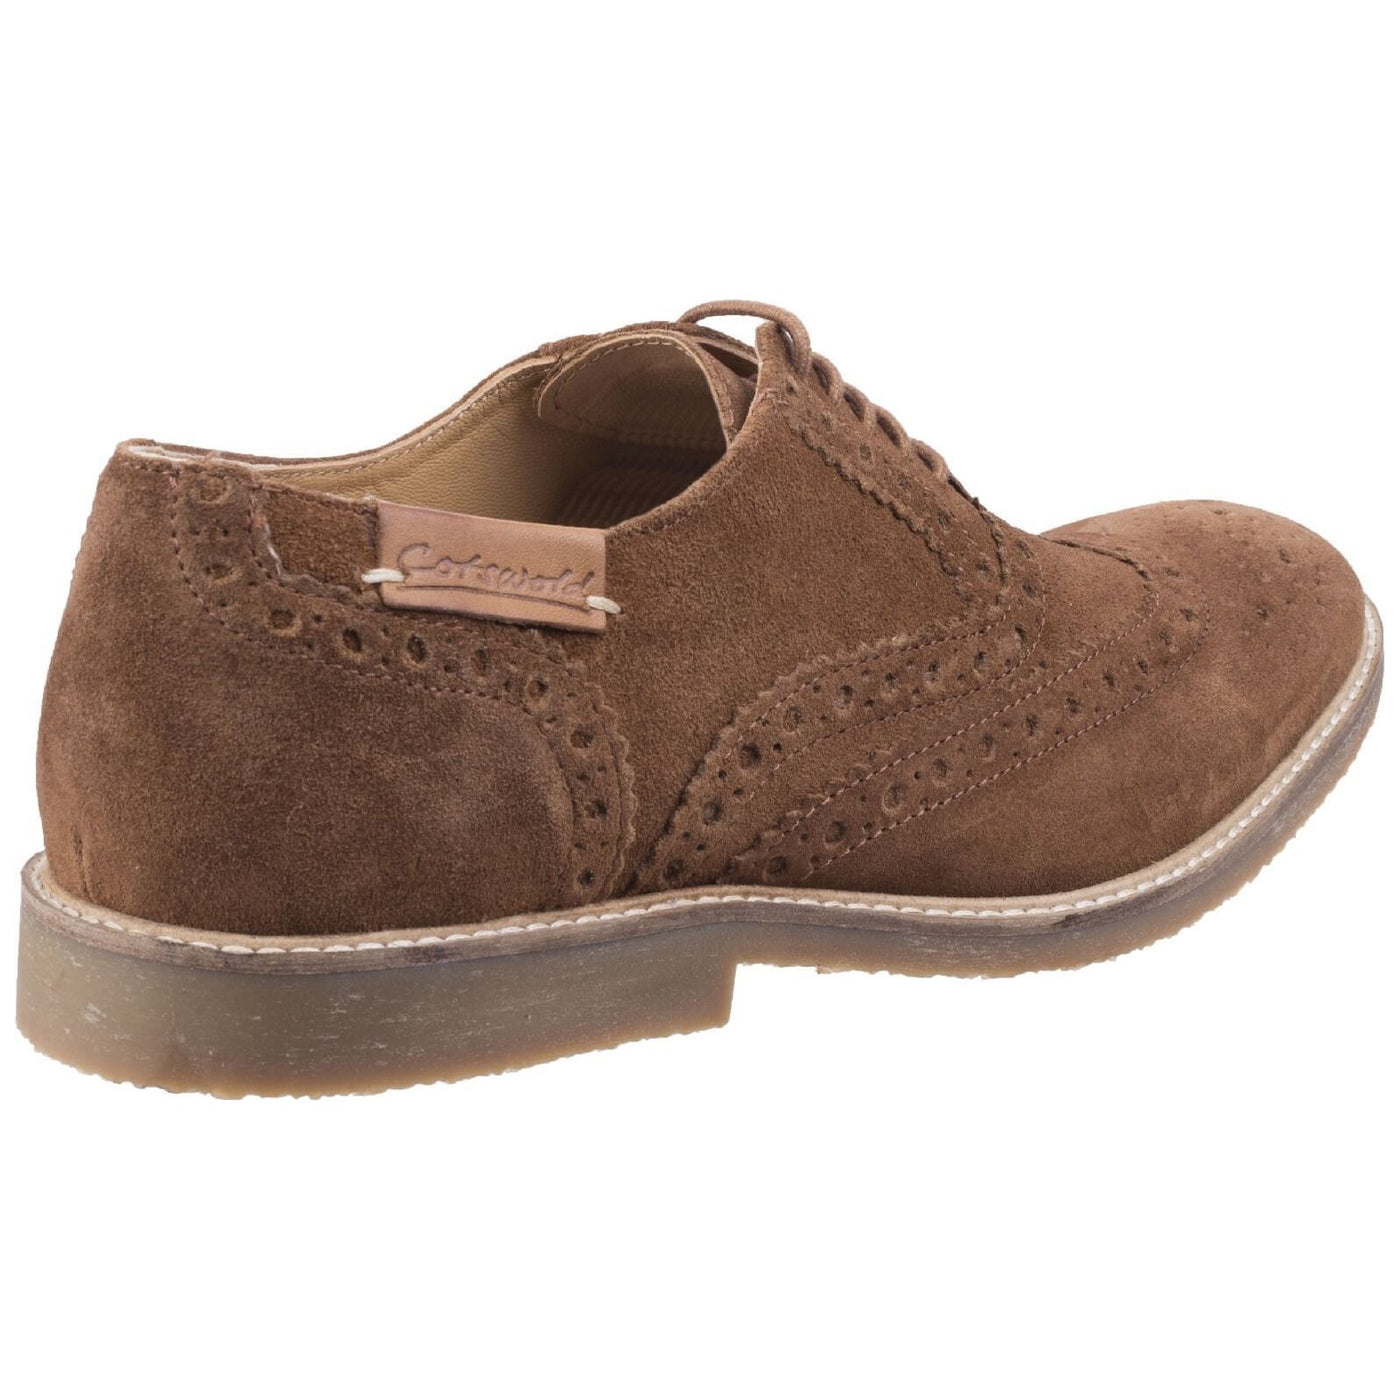 Cotswold Chatsworth Suede Wingtip Shoes-Camel-2